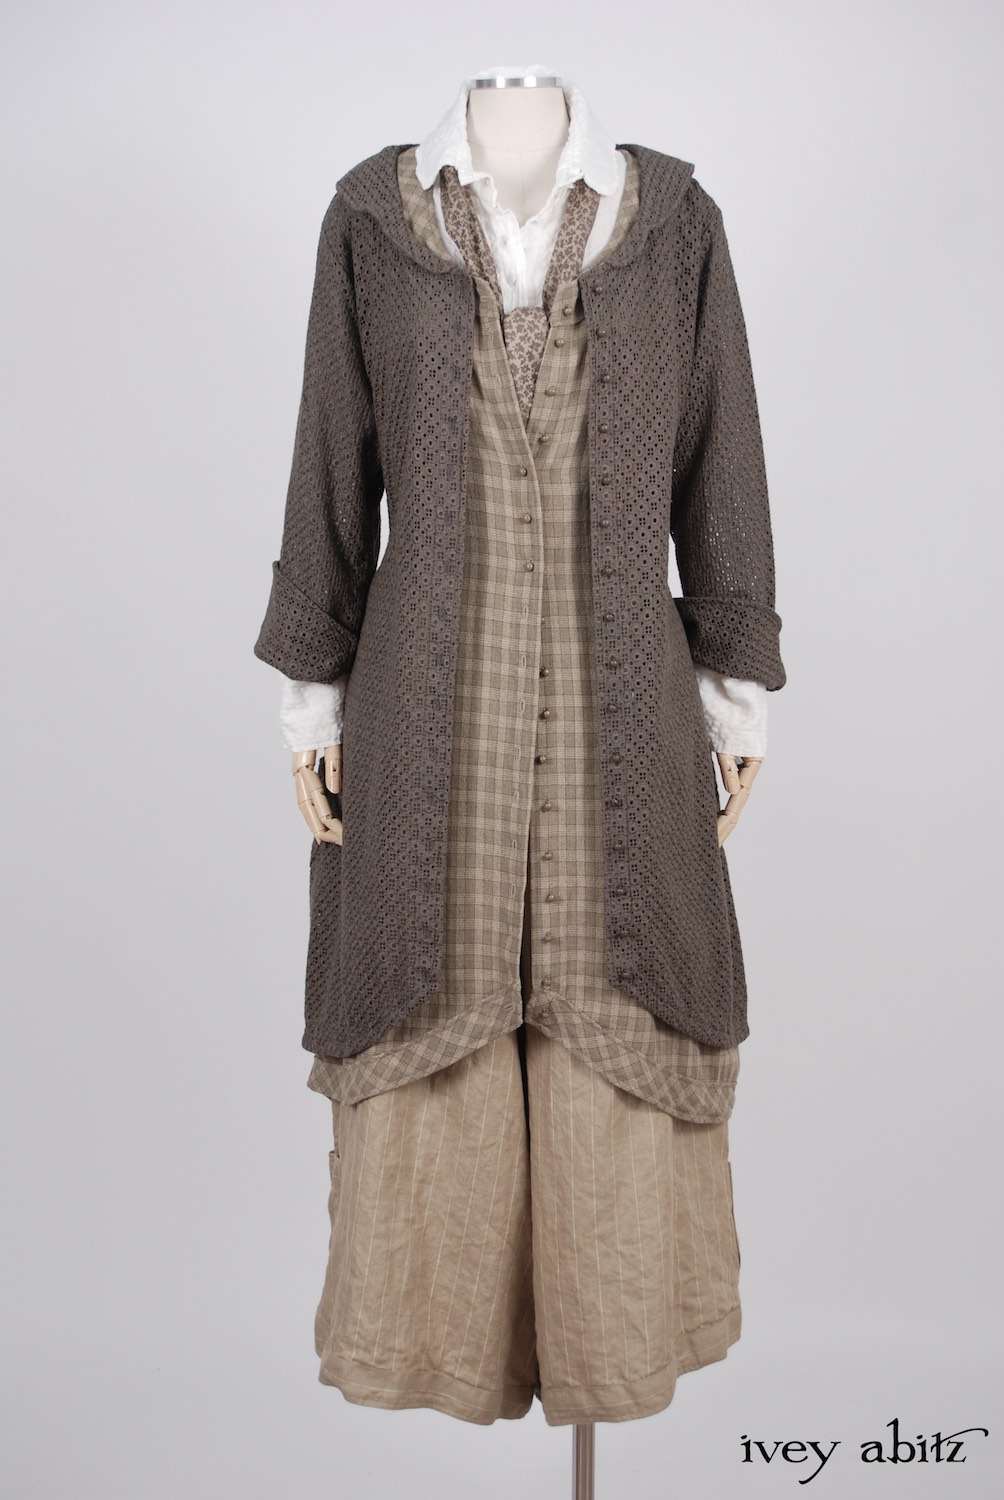 Ivey Abitz - Truitt Duster Coat in Flaxseed Embroidered Eyelet - Truitt Shirt in Dove Striped Voile  - Holkham Hall Necktie in Flaxseed Leafy Silk Linen  - Truitt Frock in Flaxseed Plaid Weave  - Montague Trousers in Sandy Pinstriped Linen, High Water Length